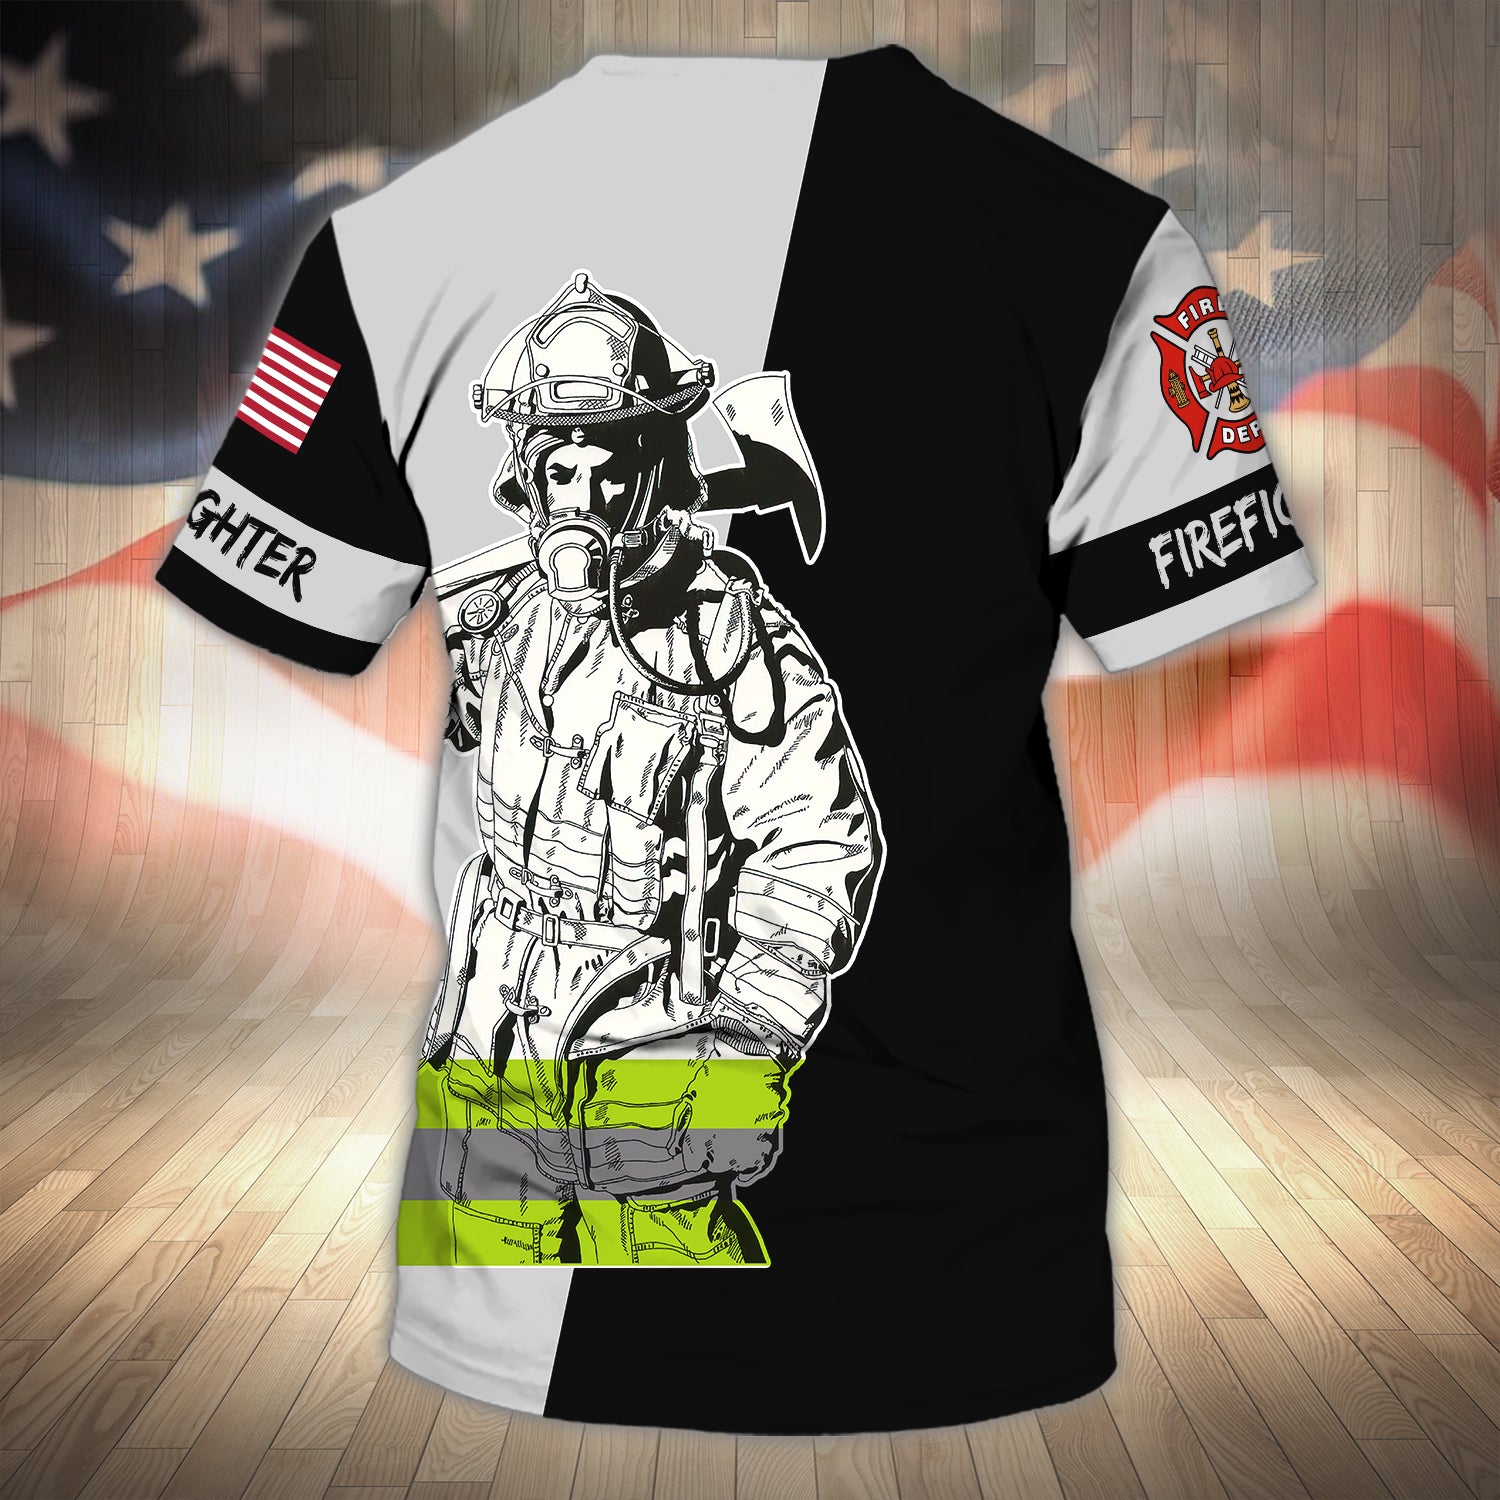 FIREFIGHTER - Personalized Name 3D Tshirt 05 - VXH98